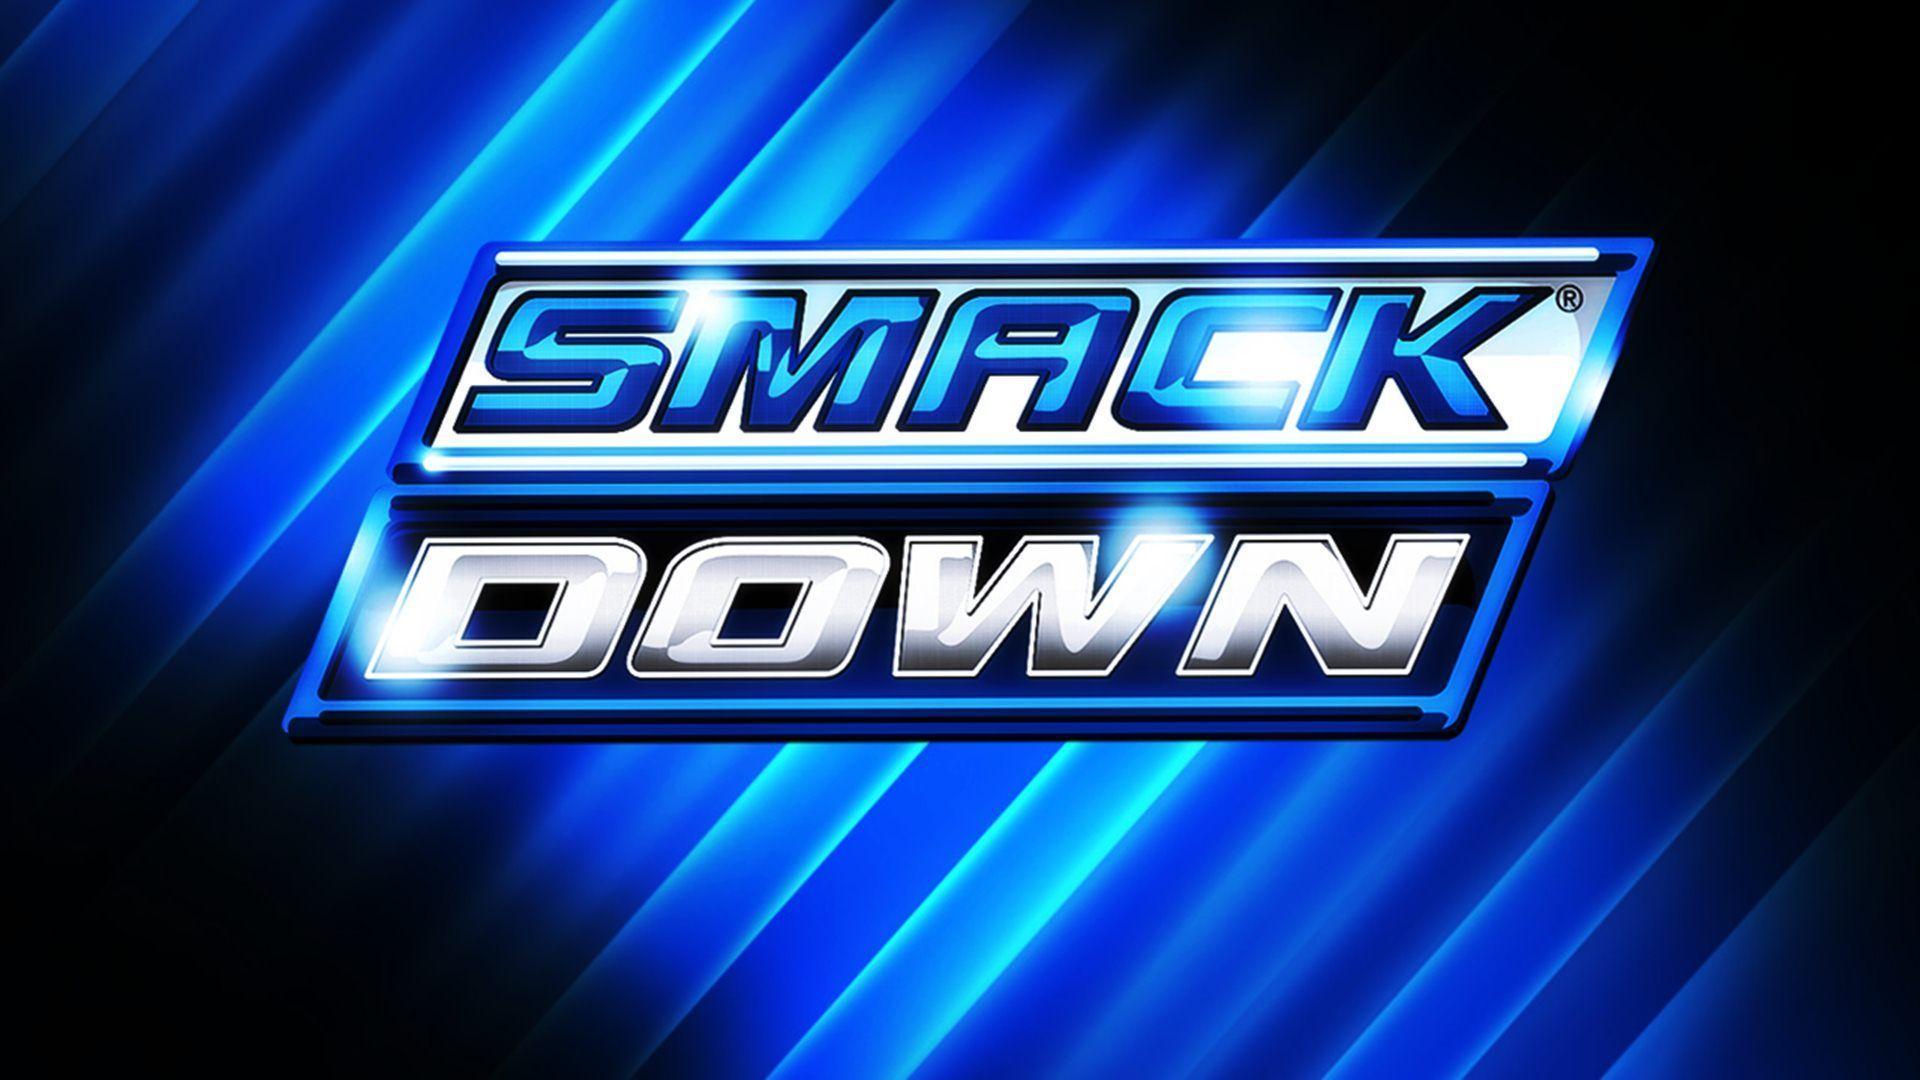 WWE SmackDown HD Image, Get Free top quality WWE SmackDown HD